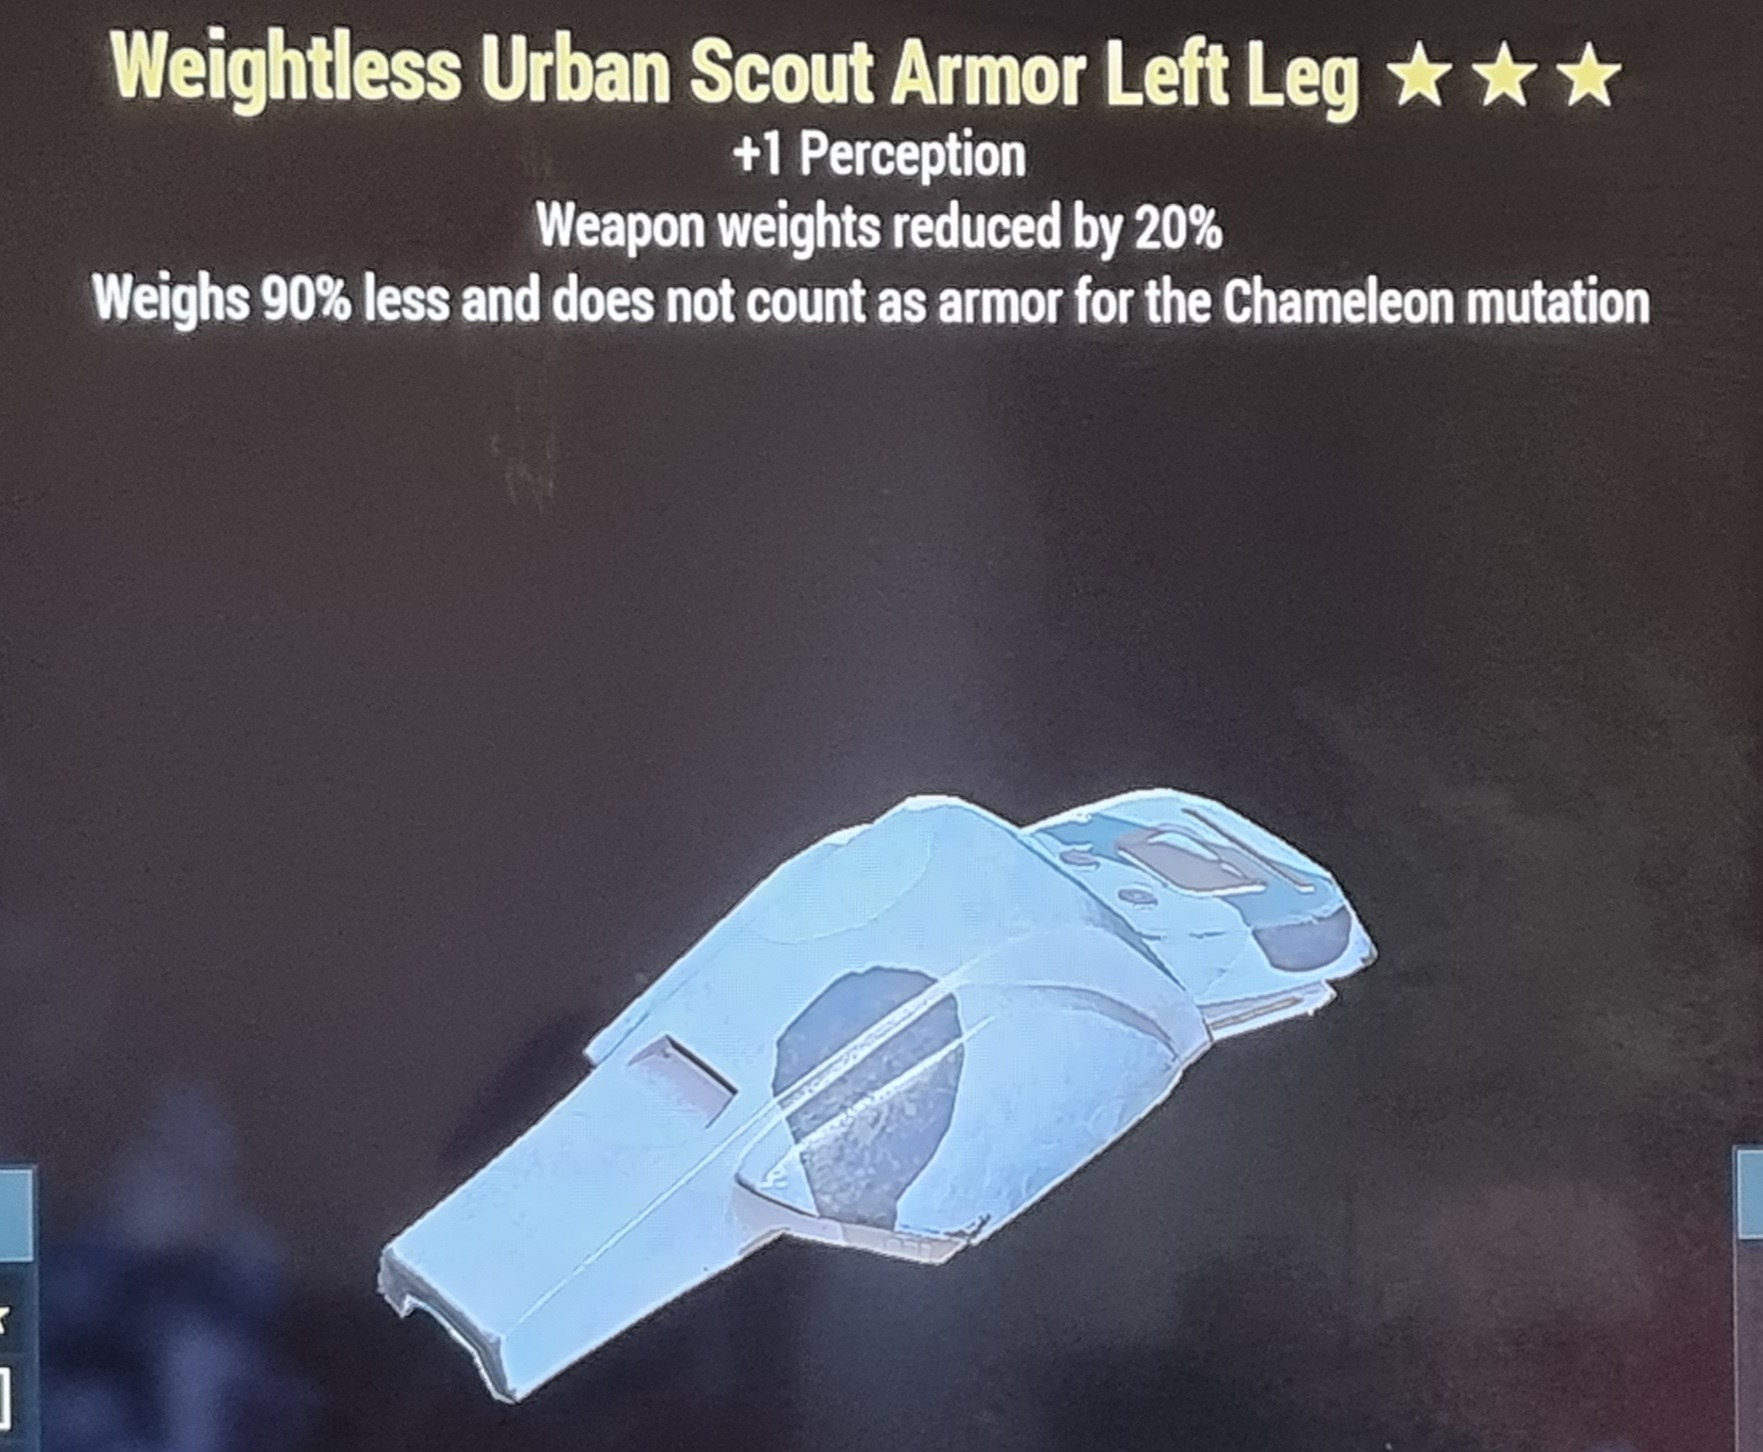 Weightless weapon Weight reduction +1 perception urban left leg FALLOUT 76 PS4